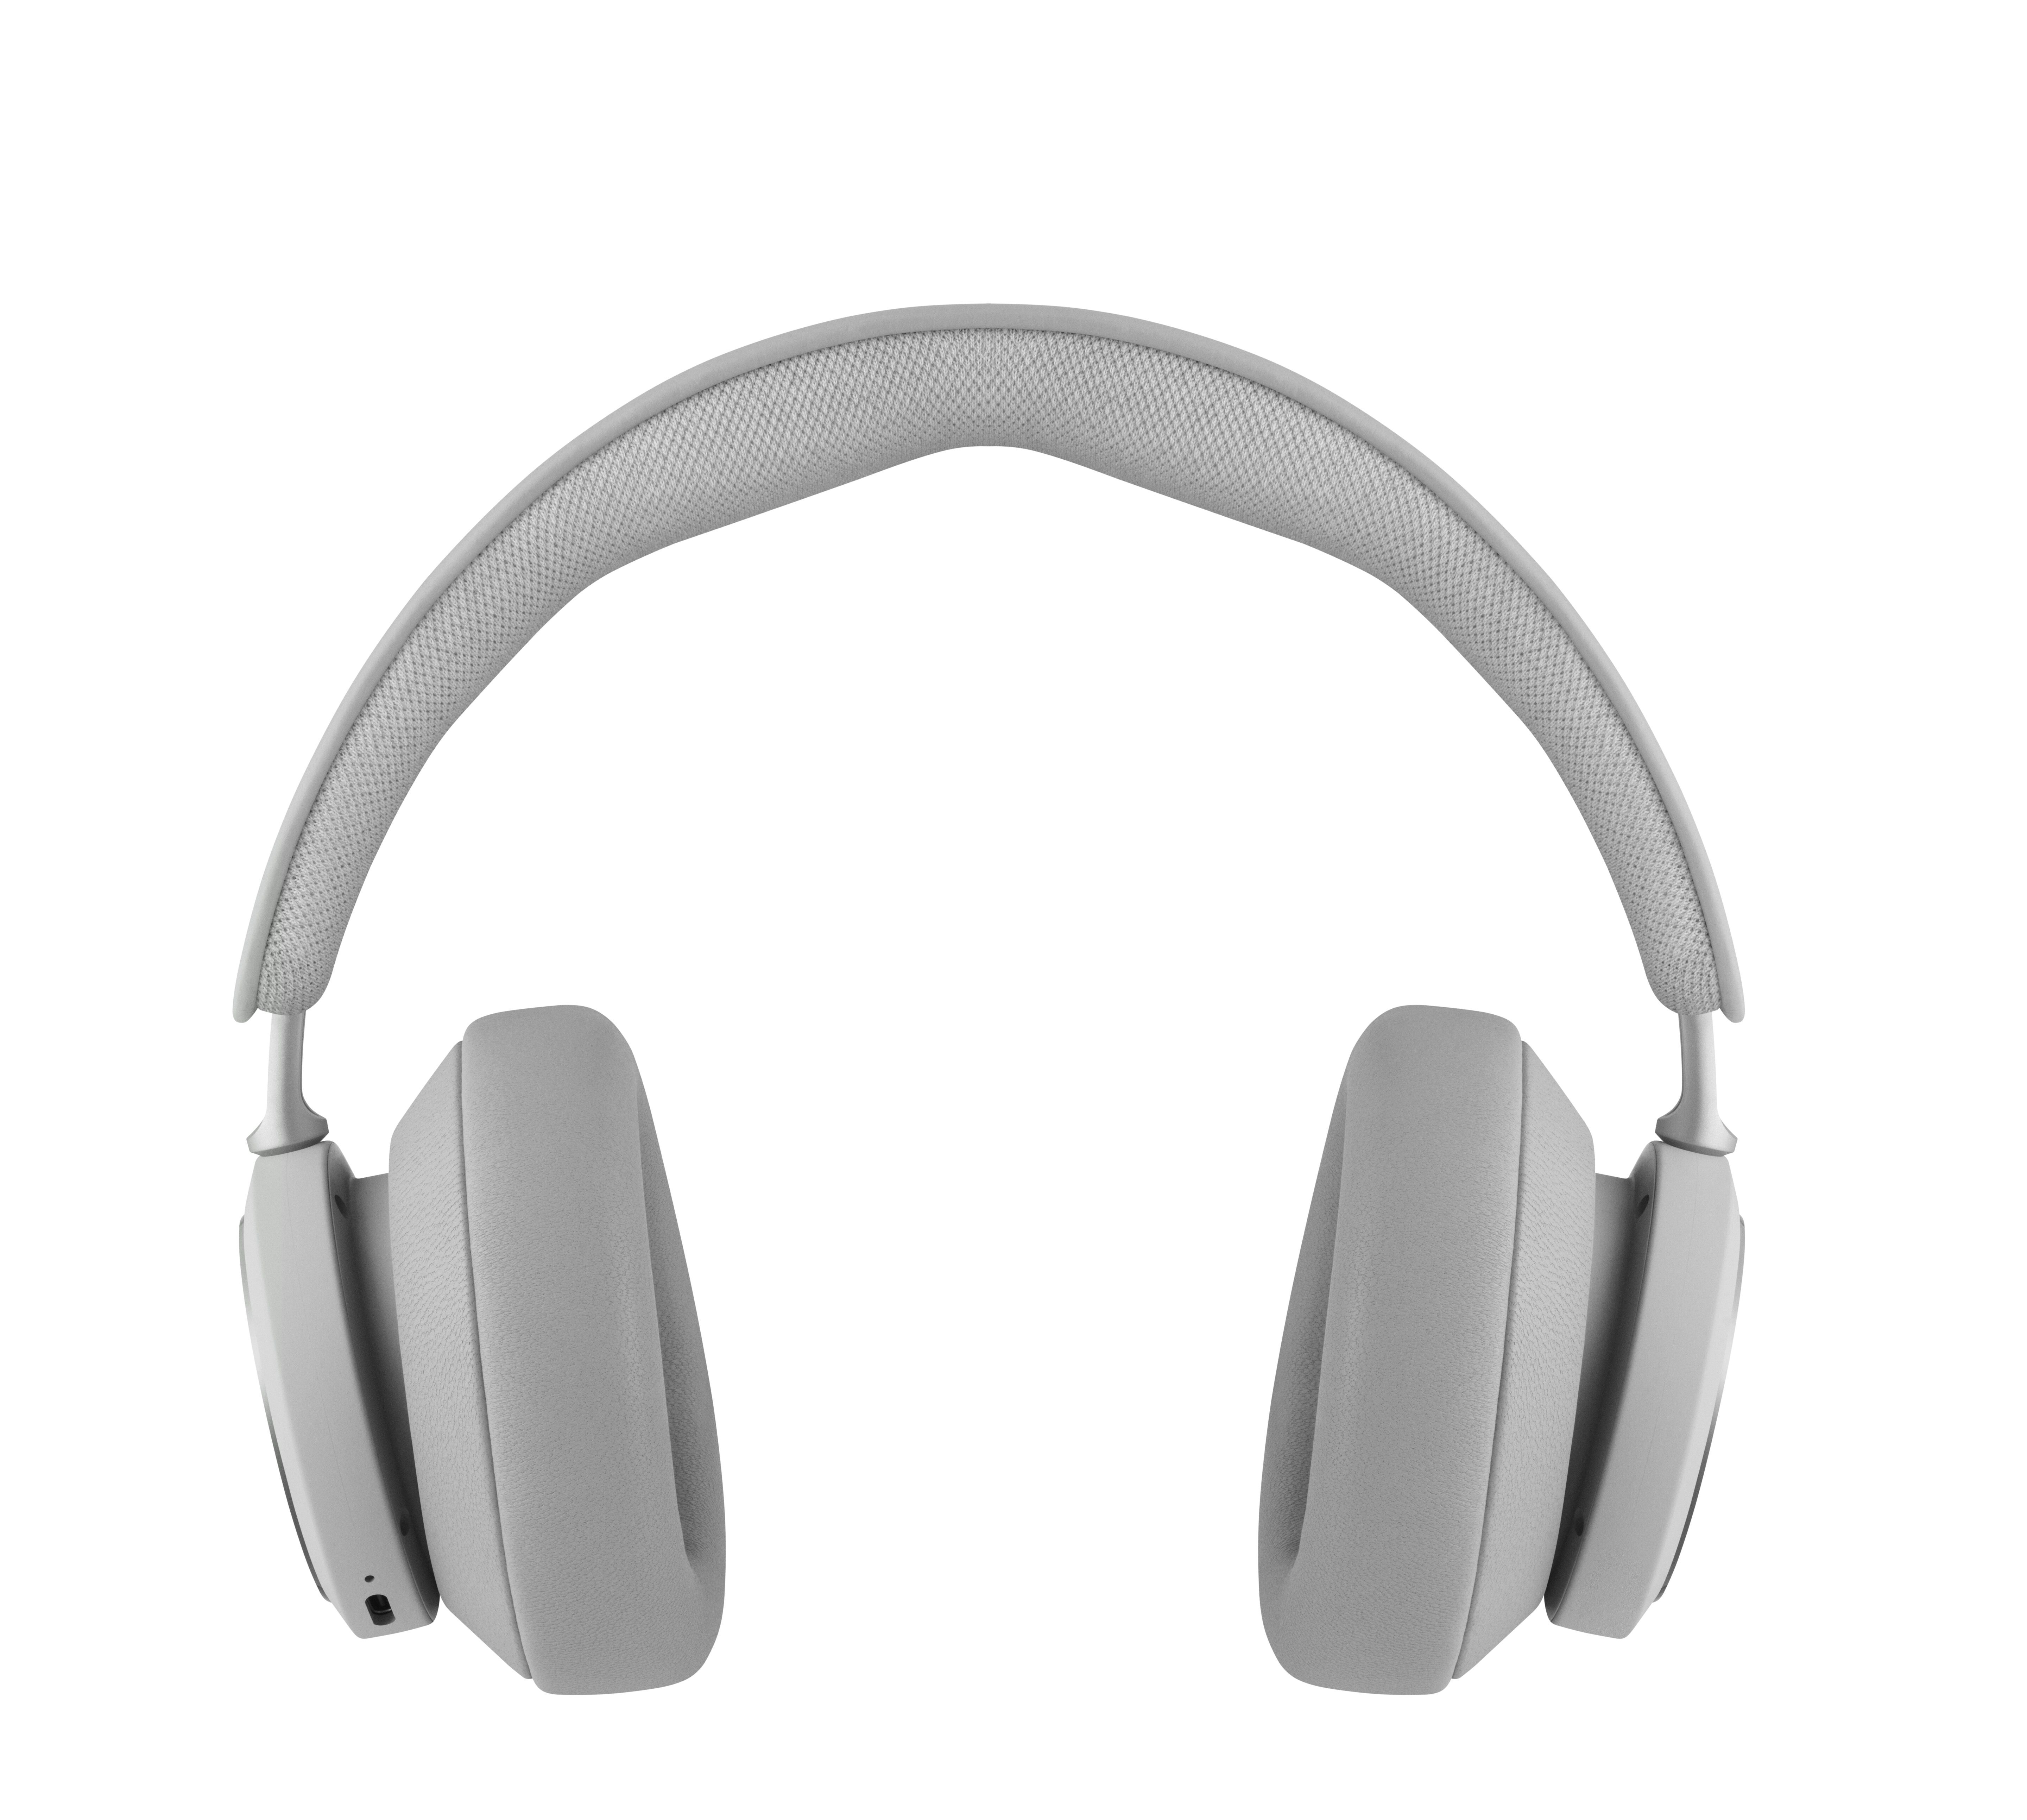 A front view of the Bang & Olufsen Cisco 980 headset.